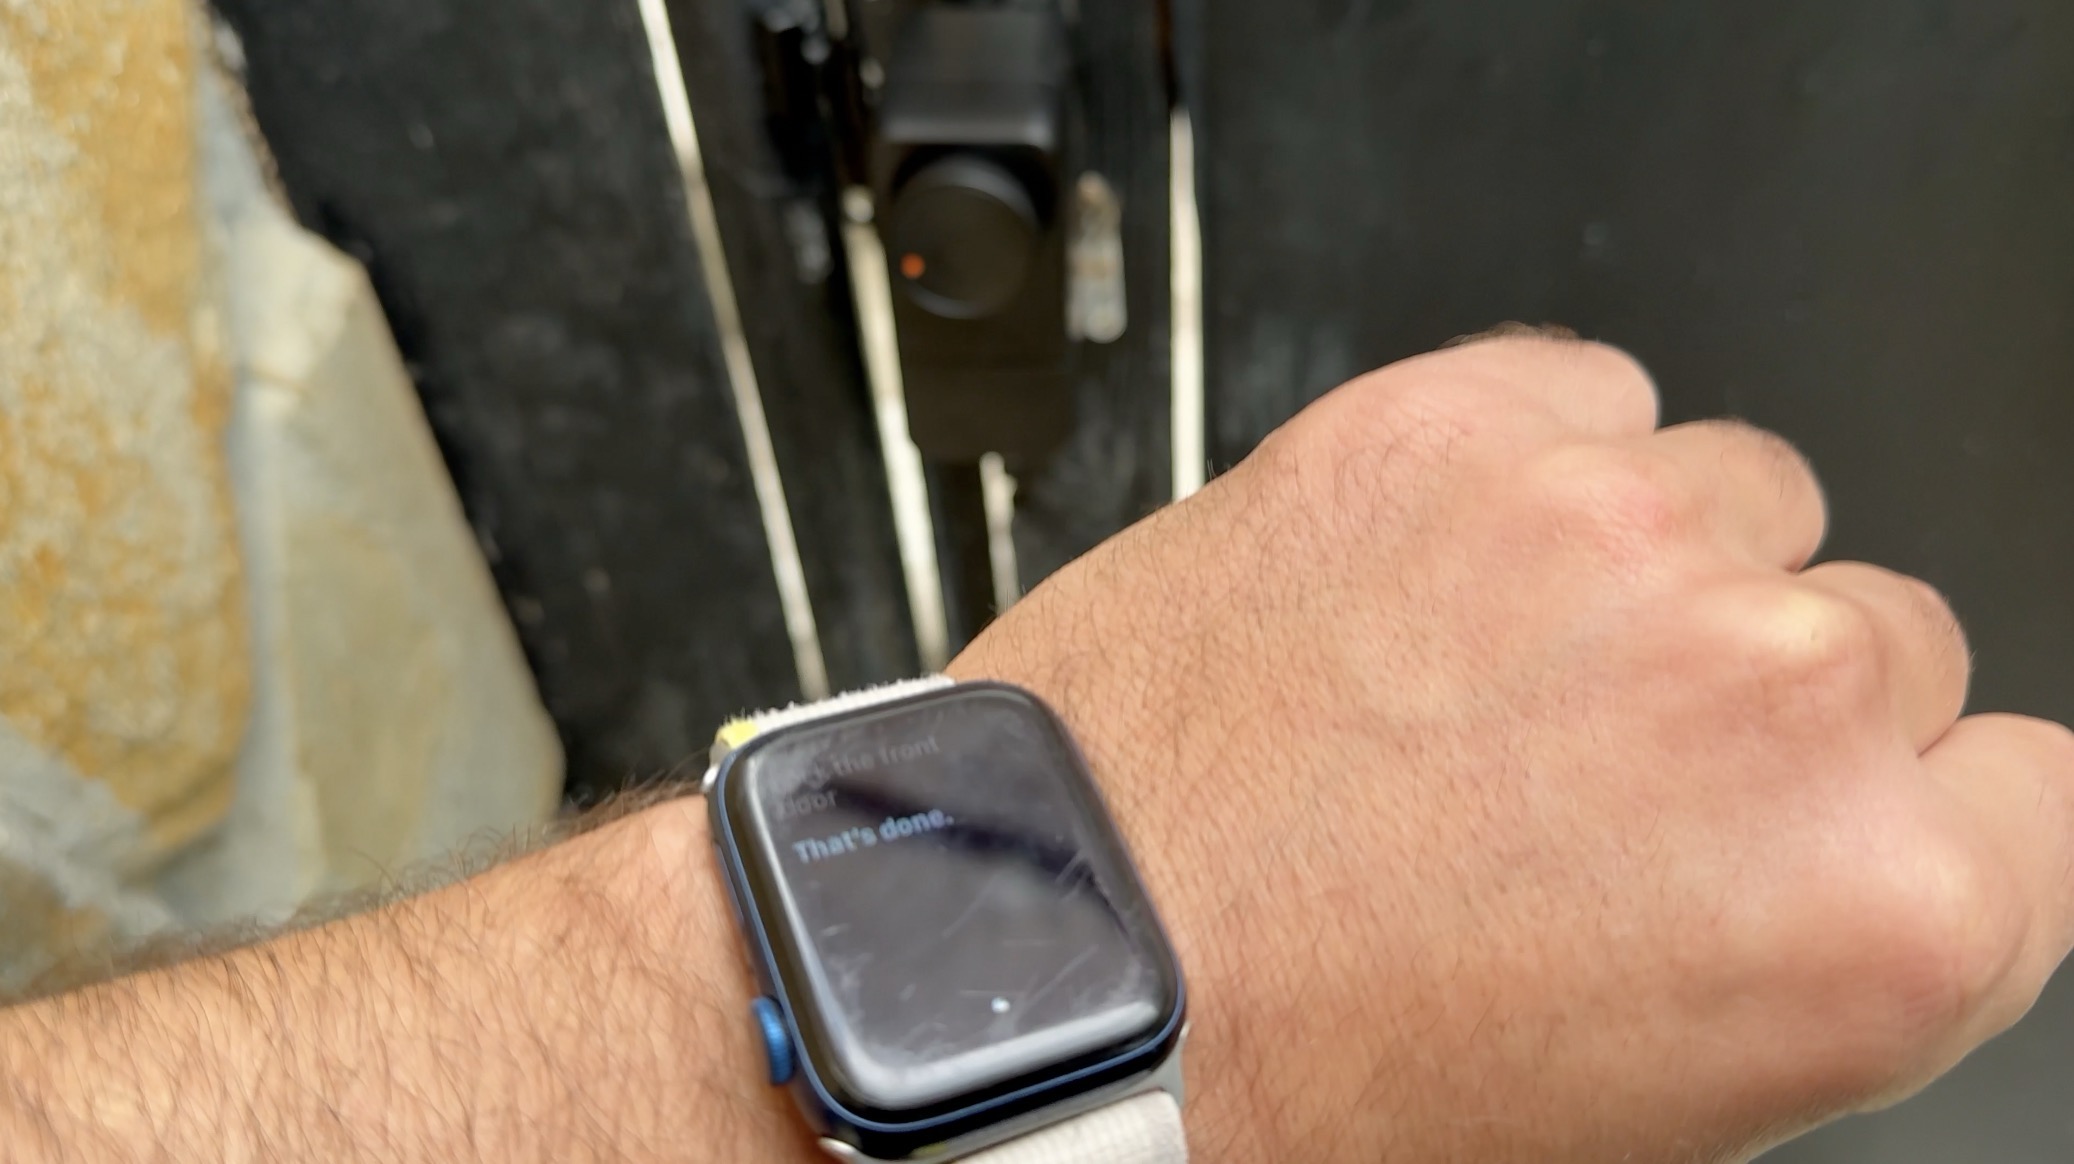 Locking the SwitchBot Lock Pro with my old and scratched Apple Watch - That's done.